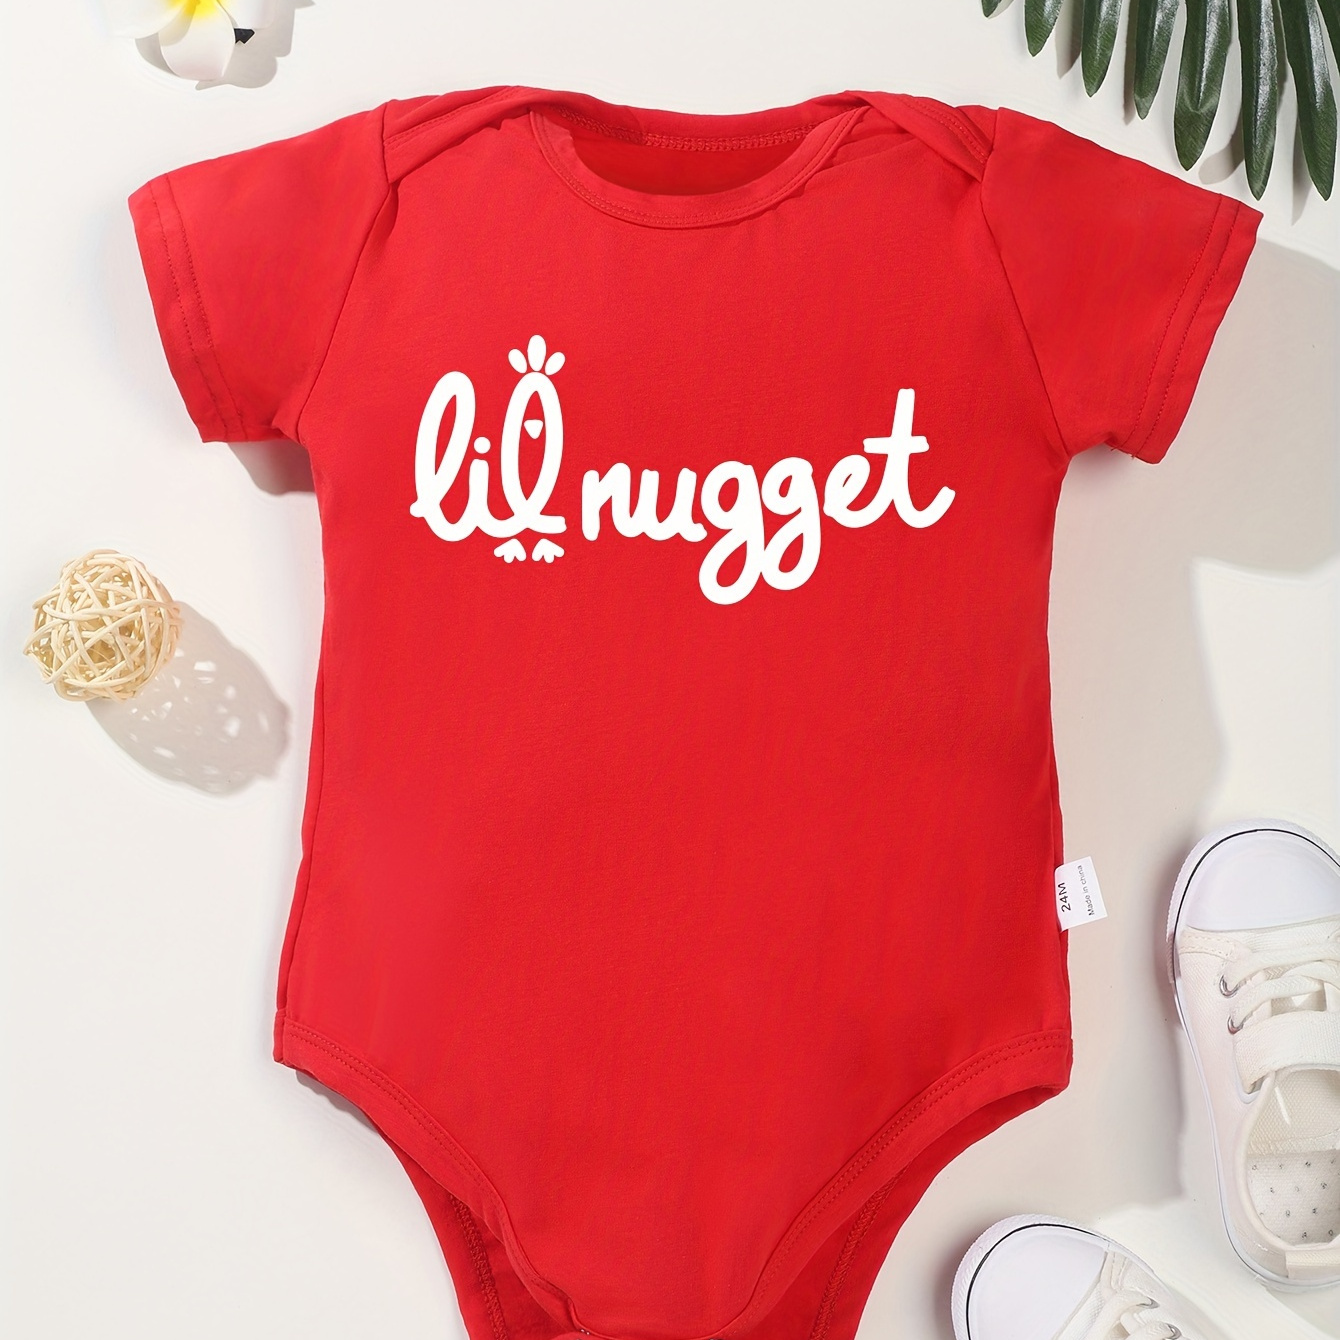 

Infant's Lil Nugget Print Cotton Bodysuit, Casual Short Sleeve Romper, Baby Boy's Clothing